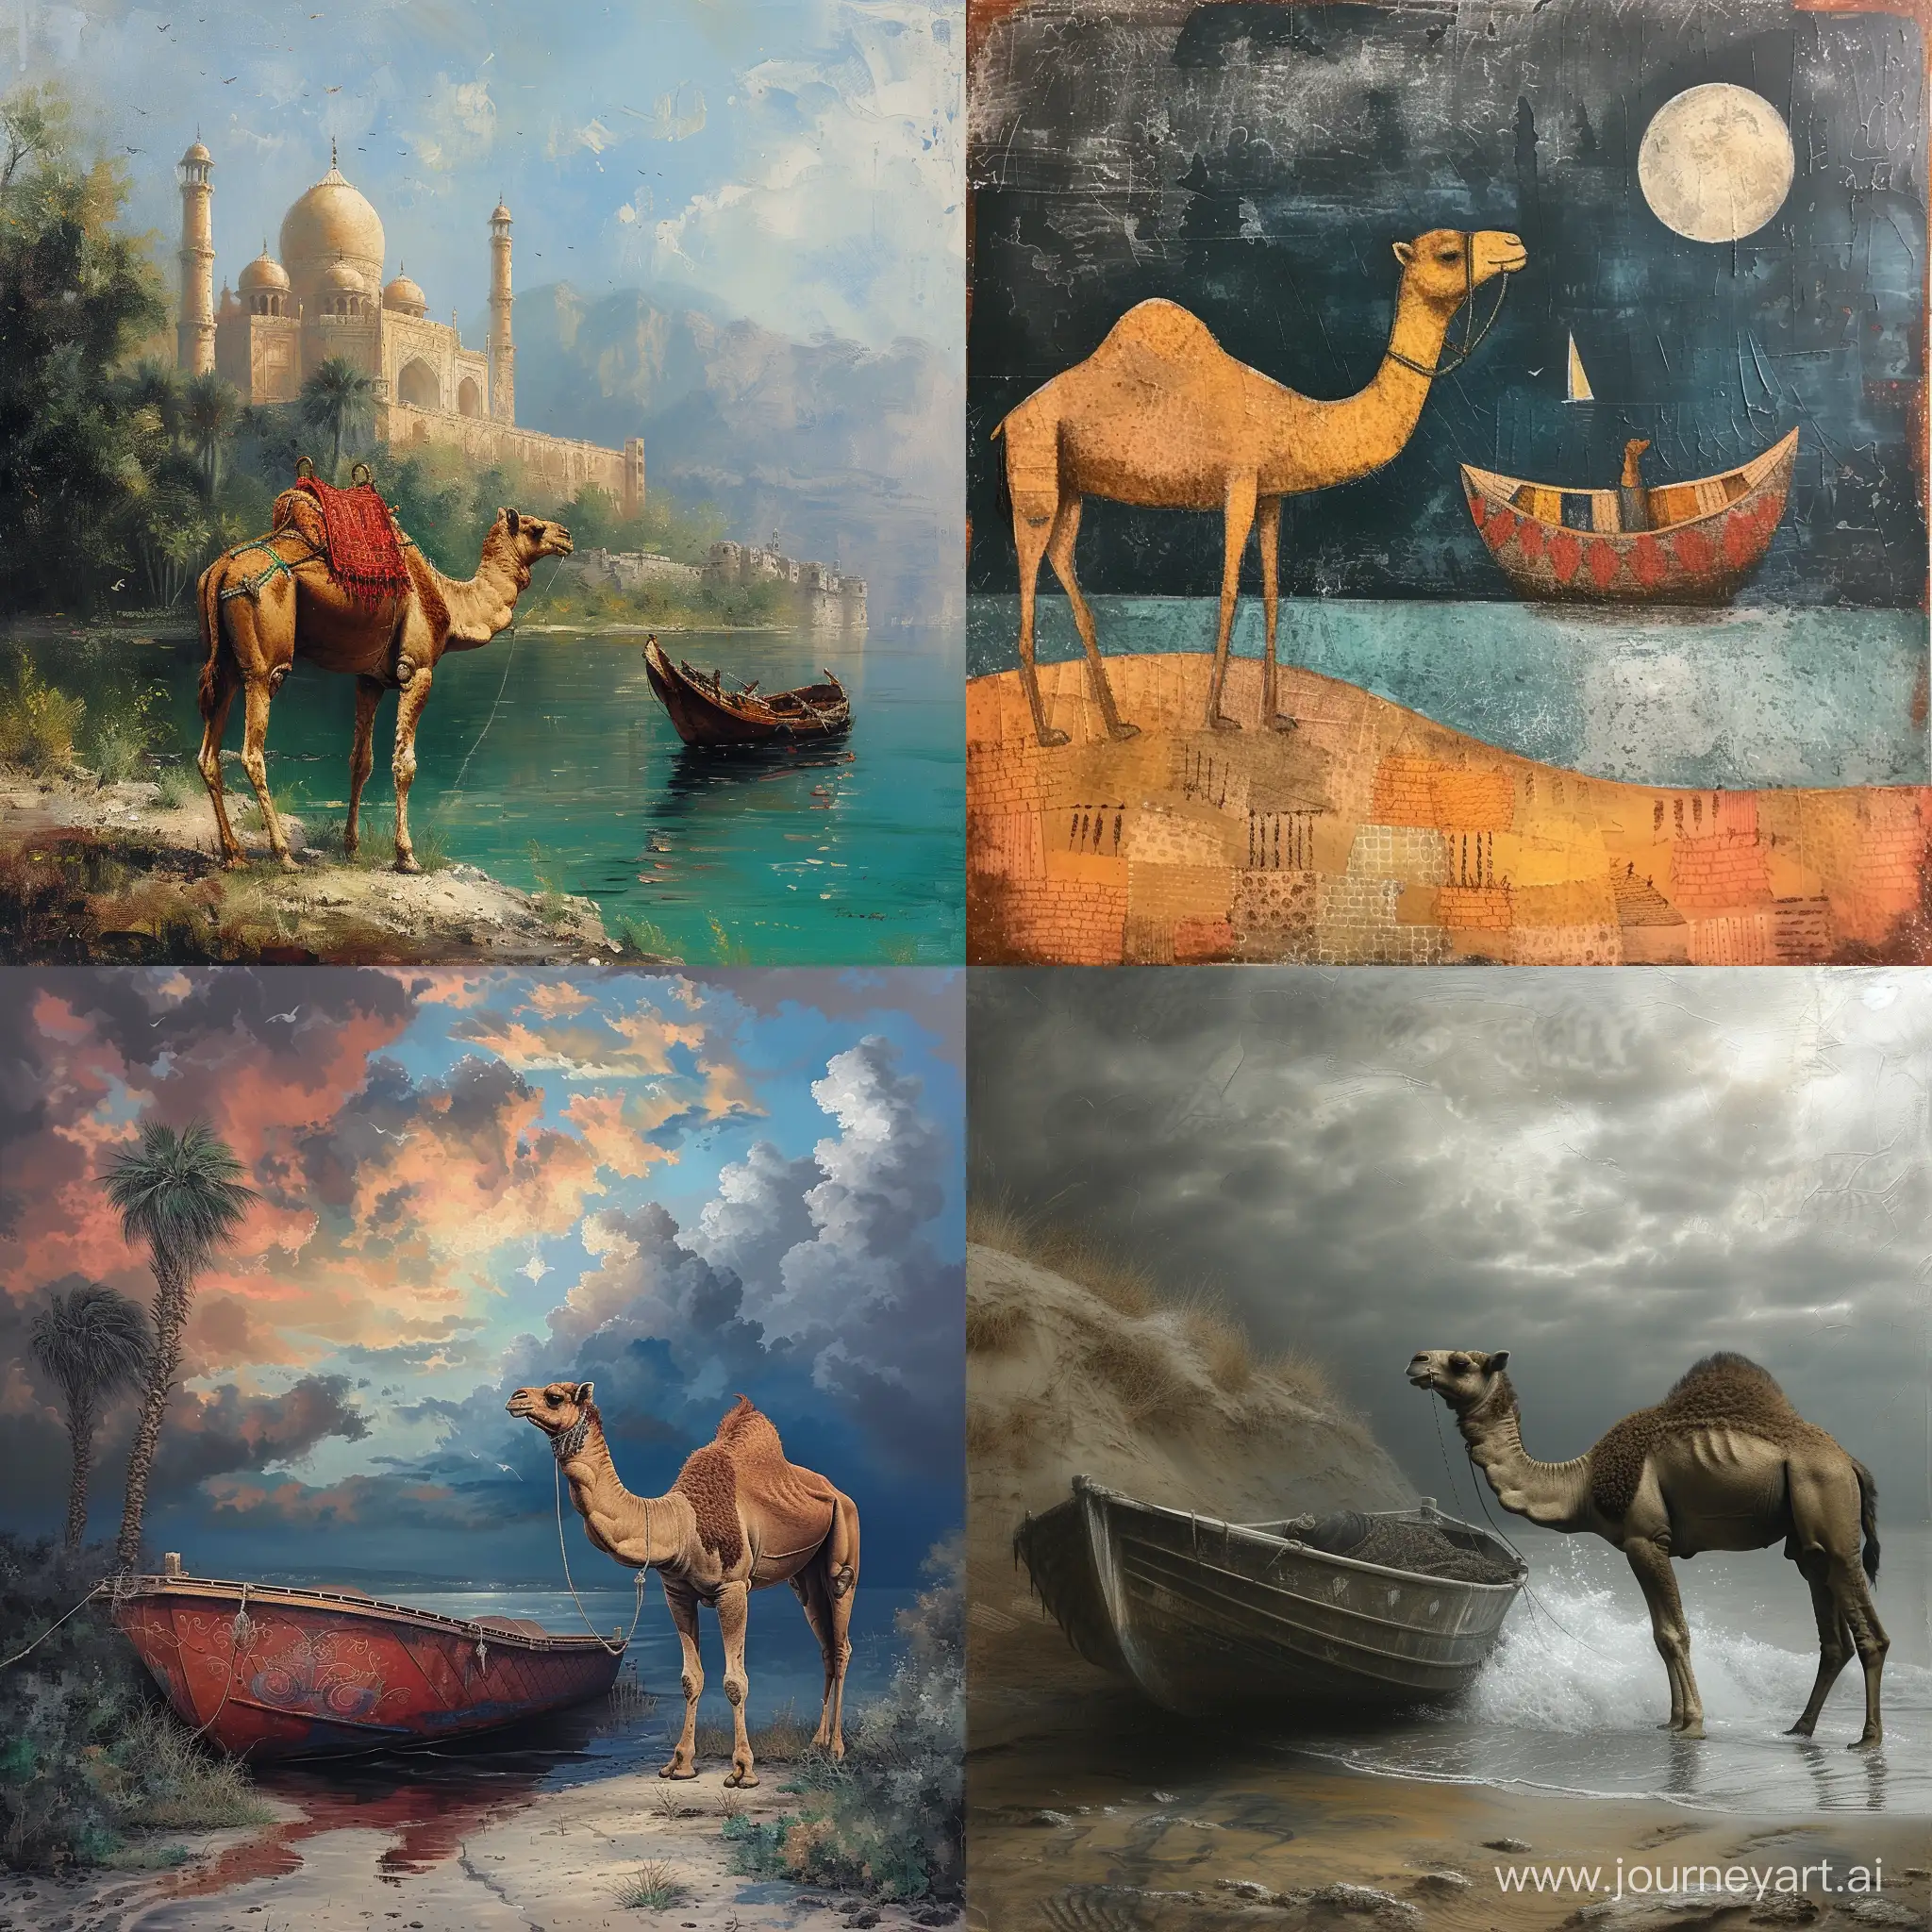 THE BOAT AND THE CAMEL MERRY IN A PLACE